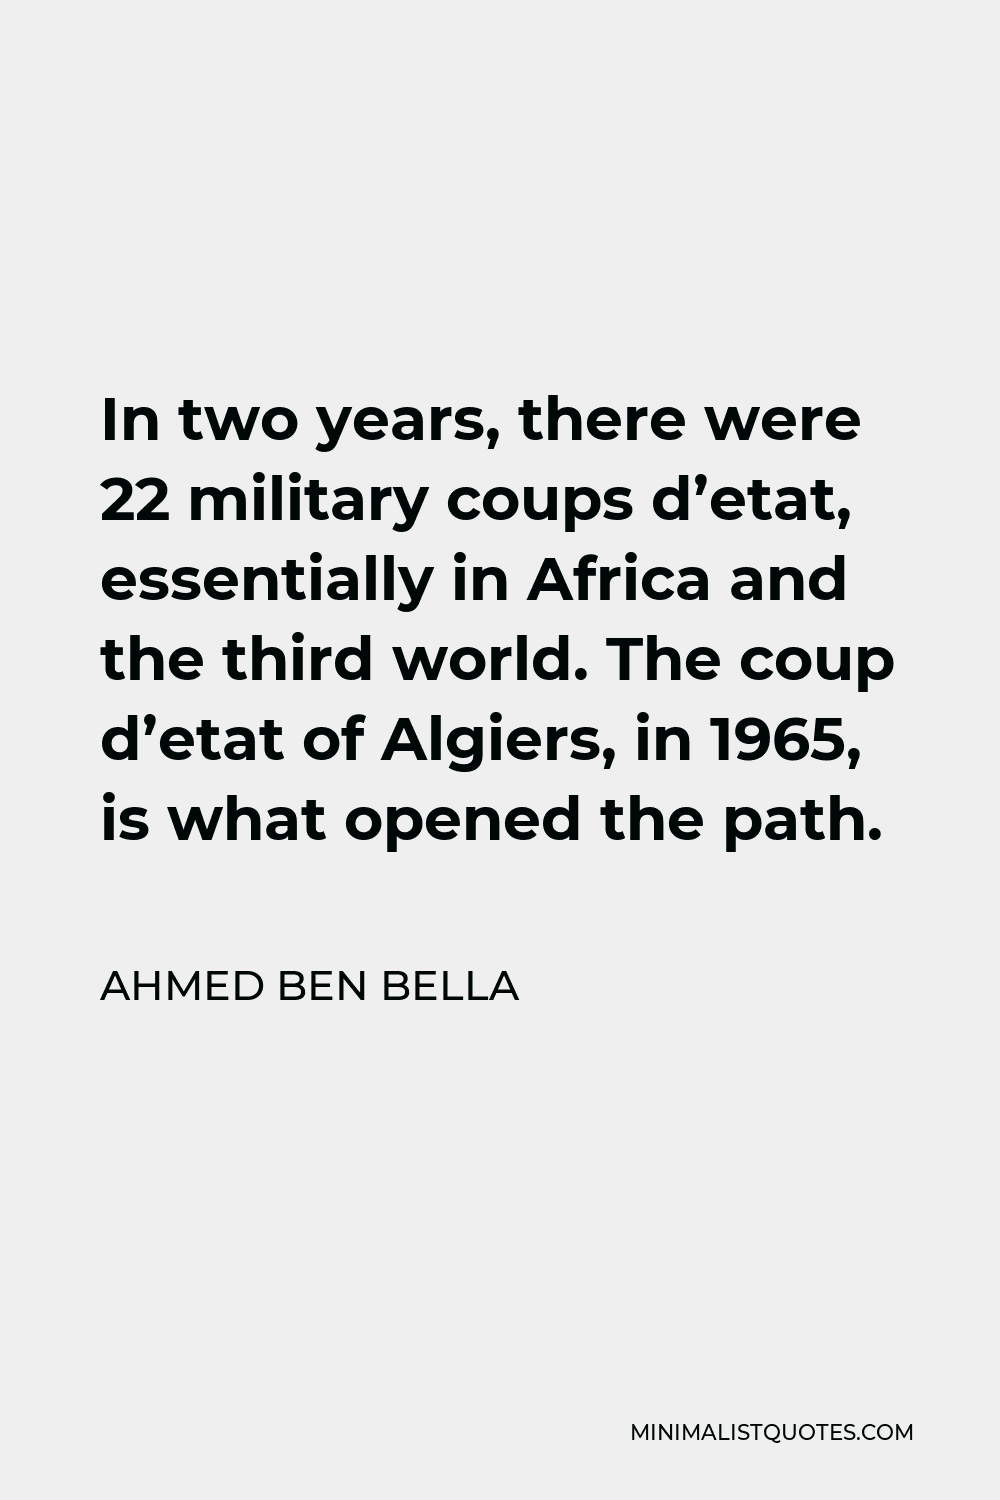 Ahmed Ben Bella Quote - In two years, there were 22 military coups d’etat, essentially in Africa and the third world. The coup d’etat of Algiers, in 1965, is what opened the path.